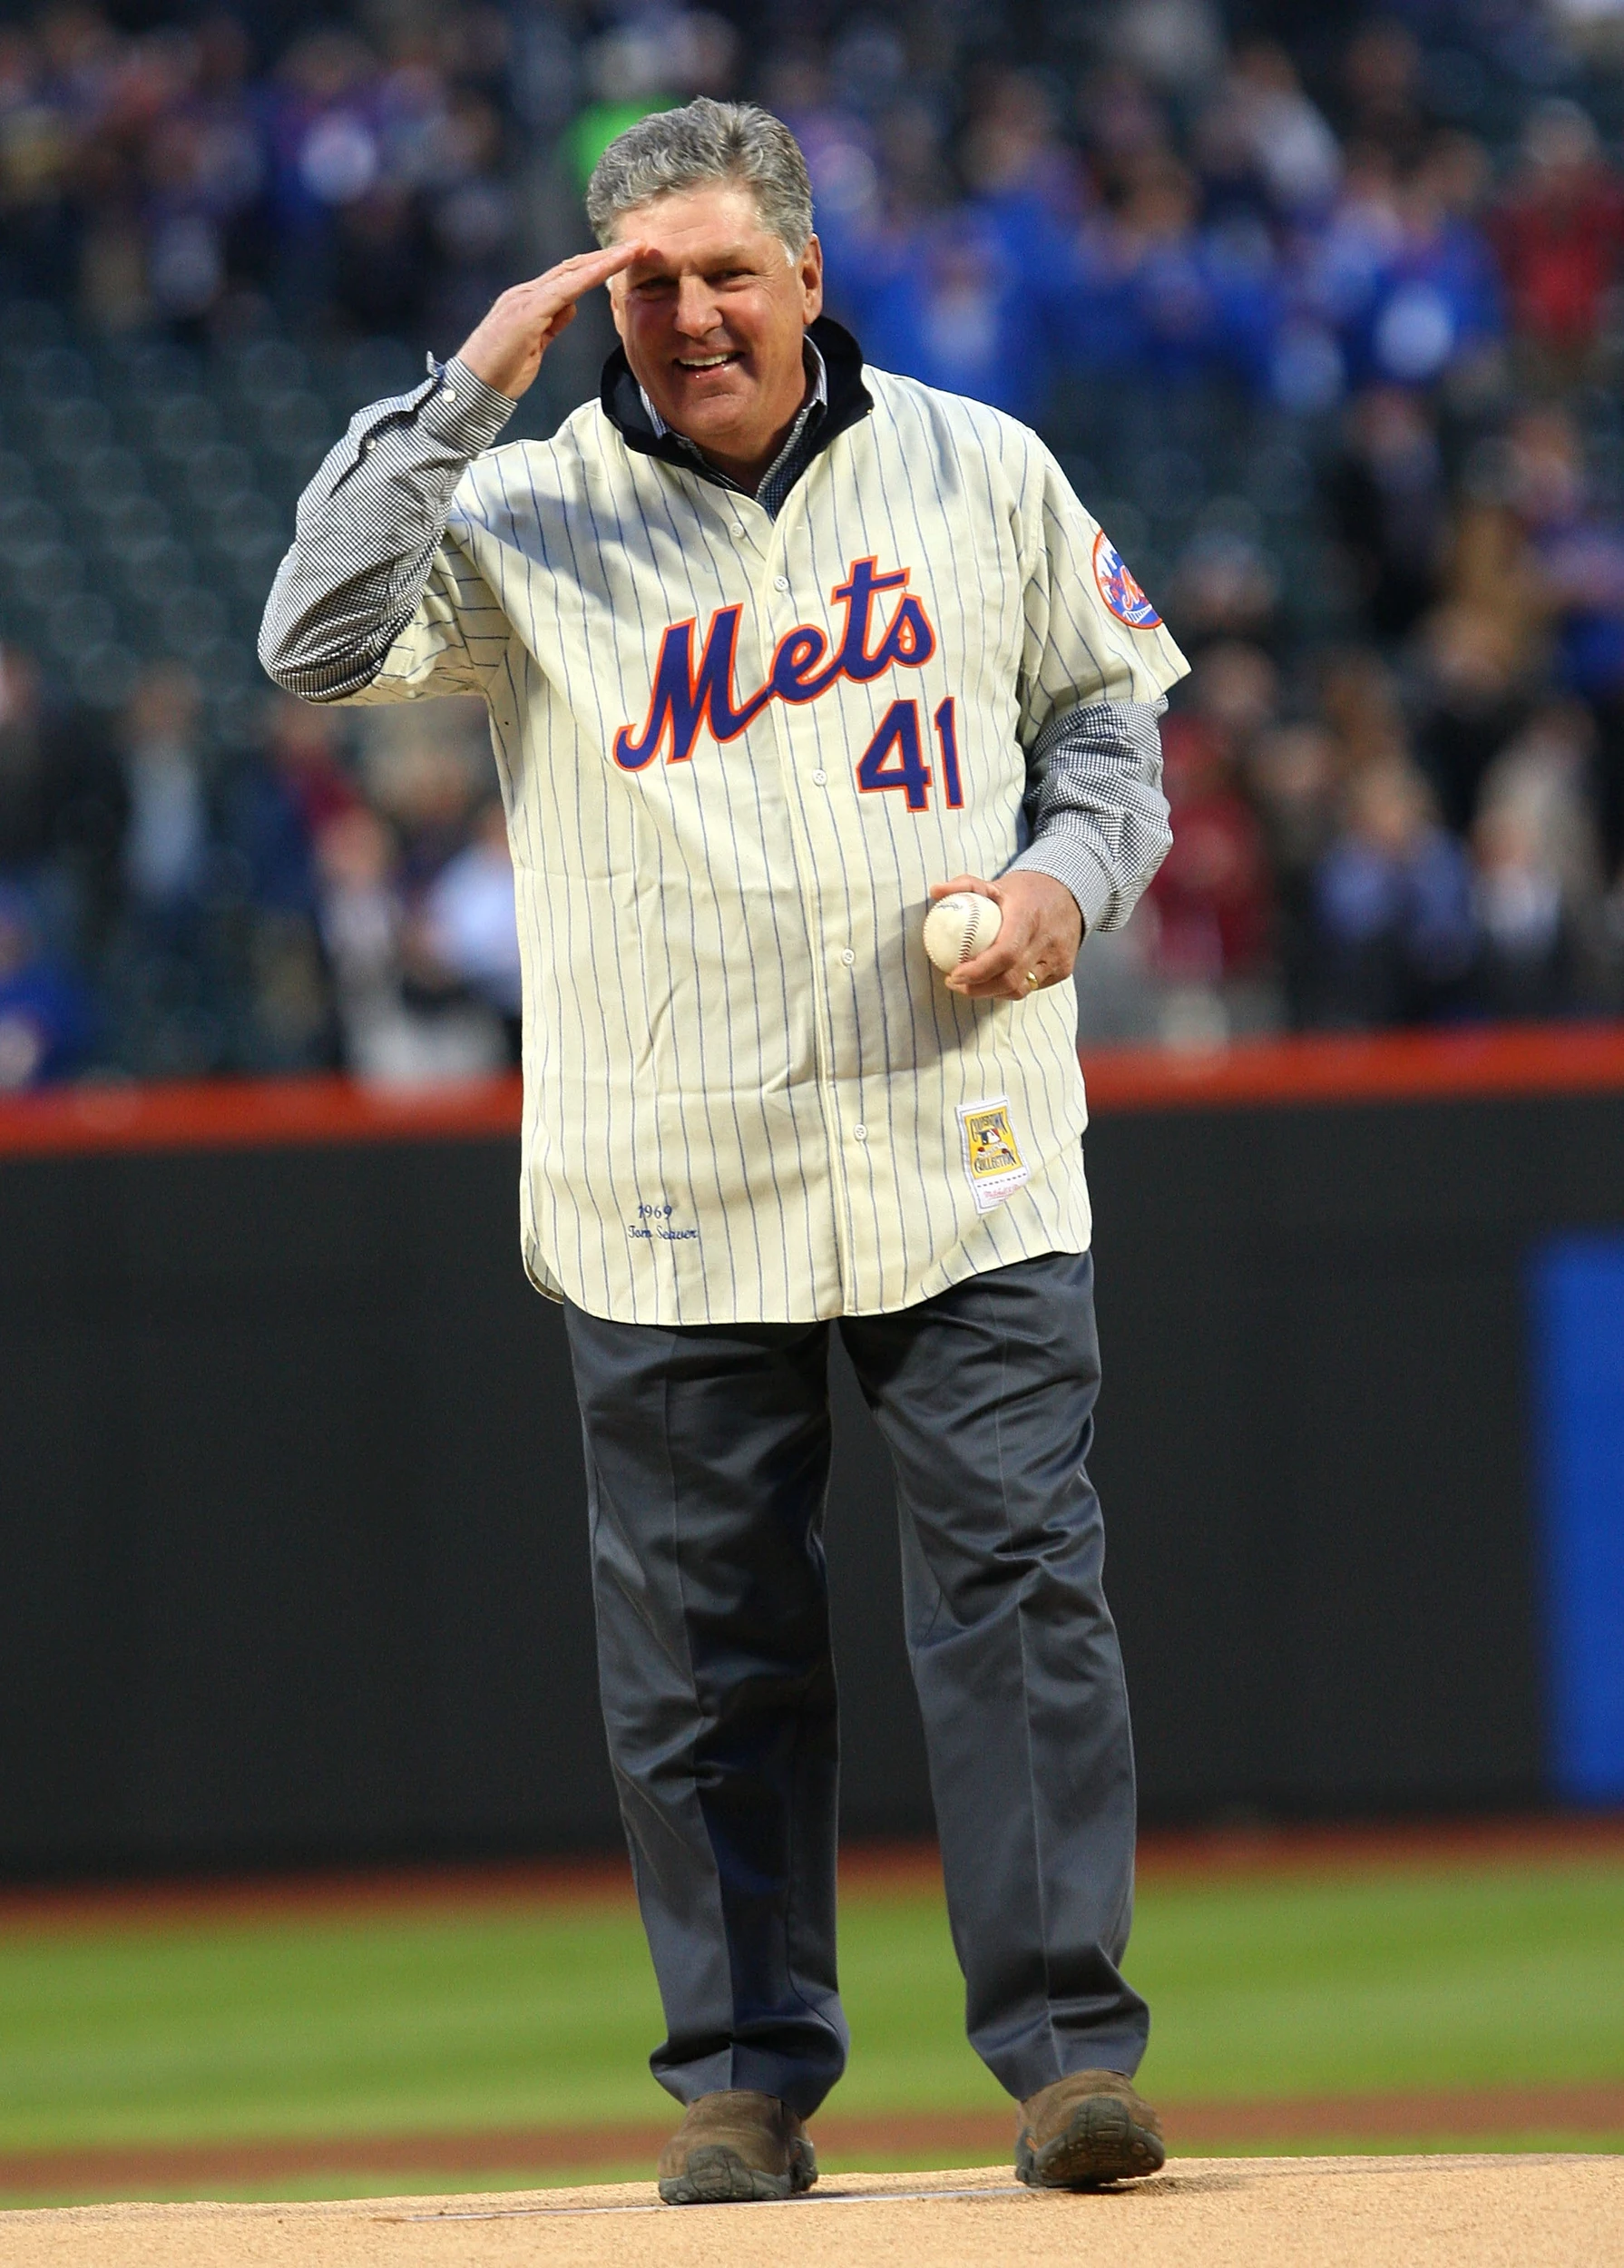 New York Mets legend Tom Seaver dies at 75 after battle with